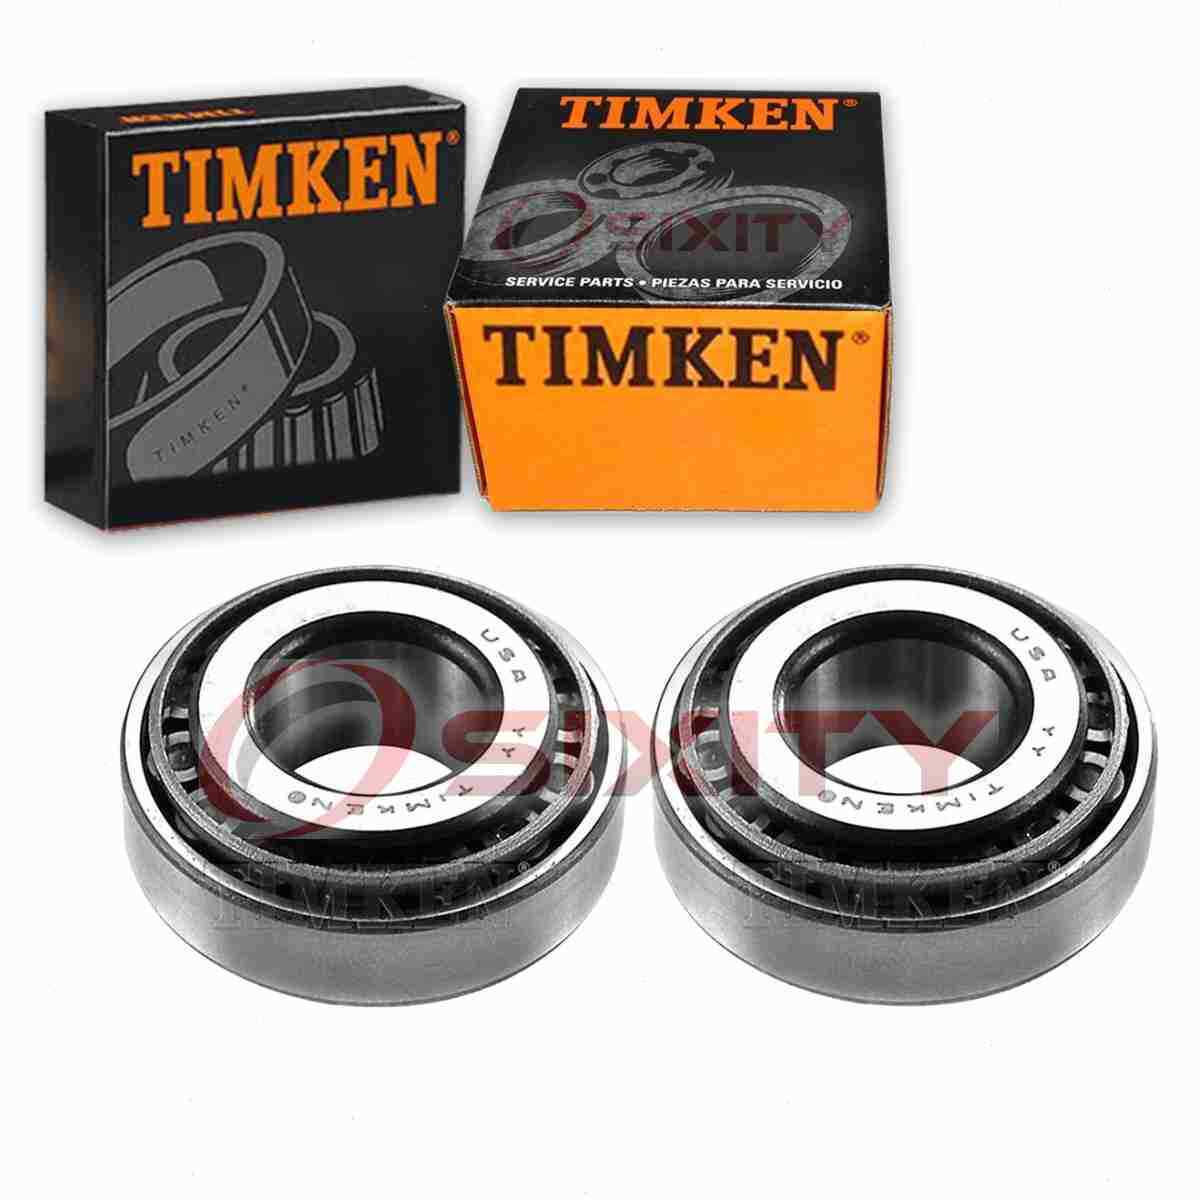 2 pc Timken Rear Outer Wheel Bearing and Race Sets for 1978-1982 Dodge Omni pn